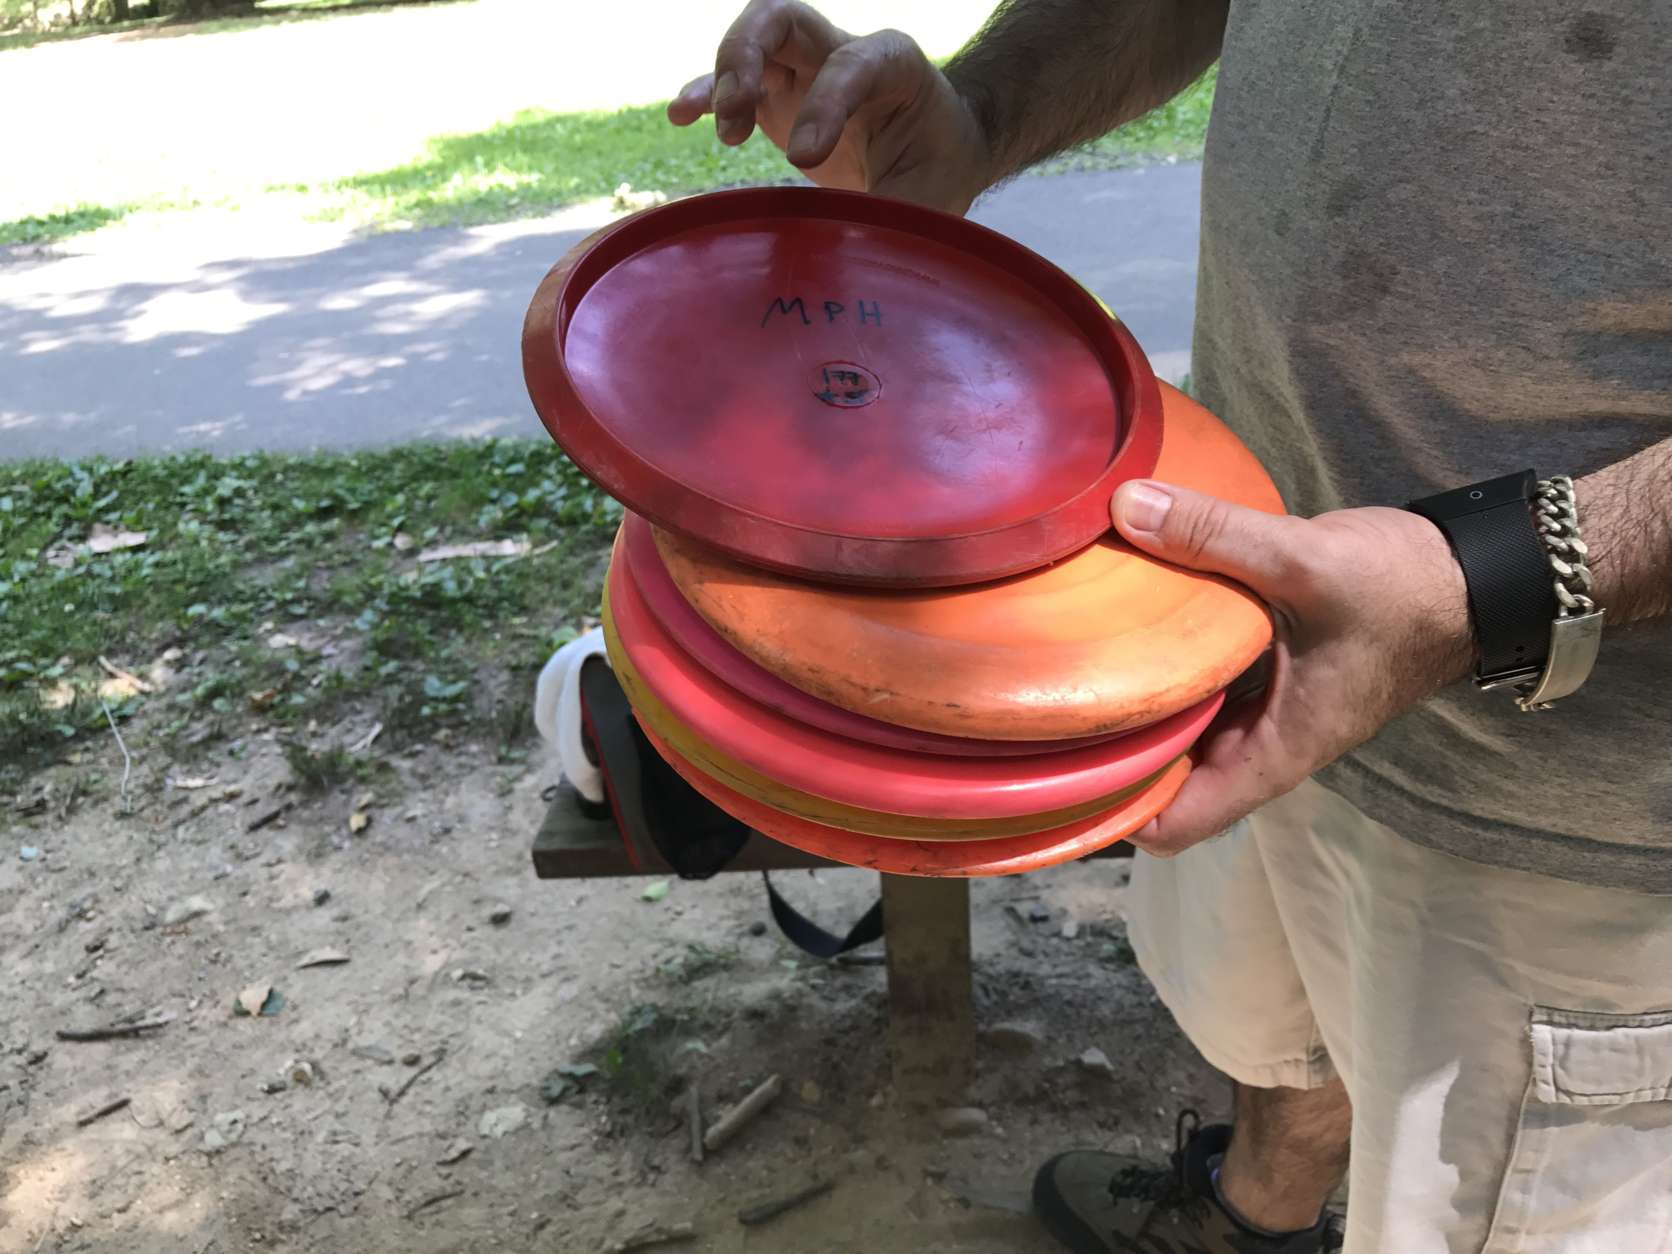 WTOP's J. Brooks shows off different types of discs that you can use for the sport. (WTOP/Ginger Whitaker)